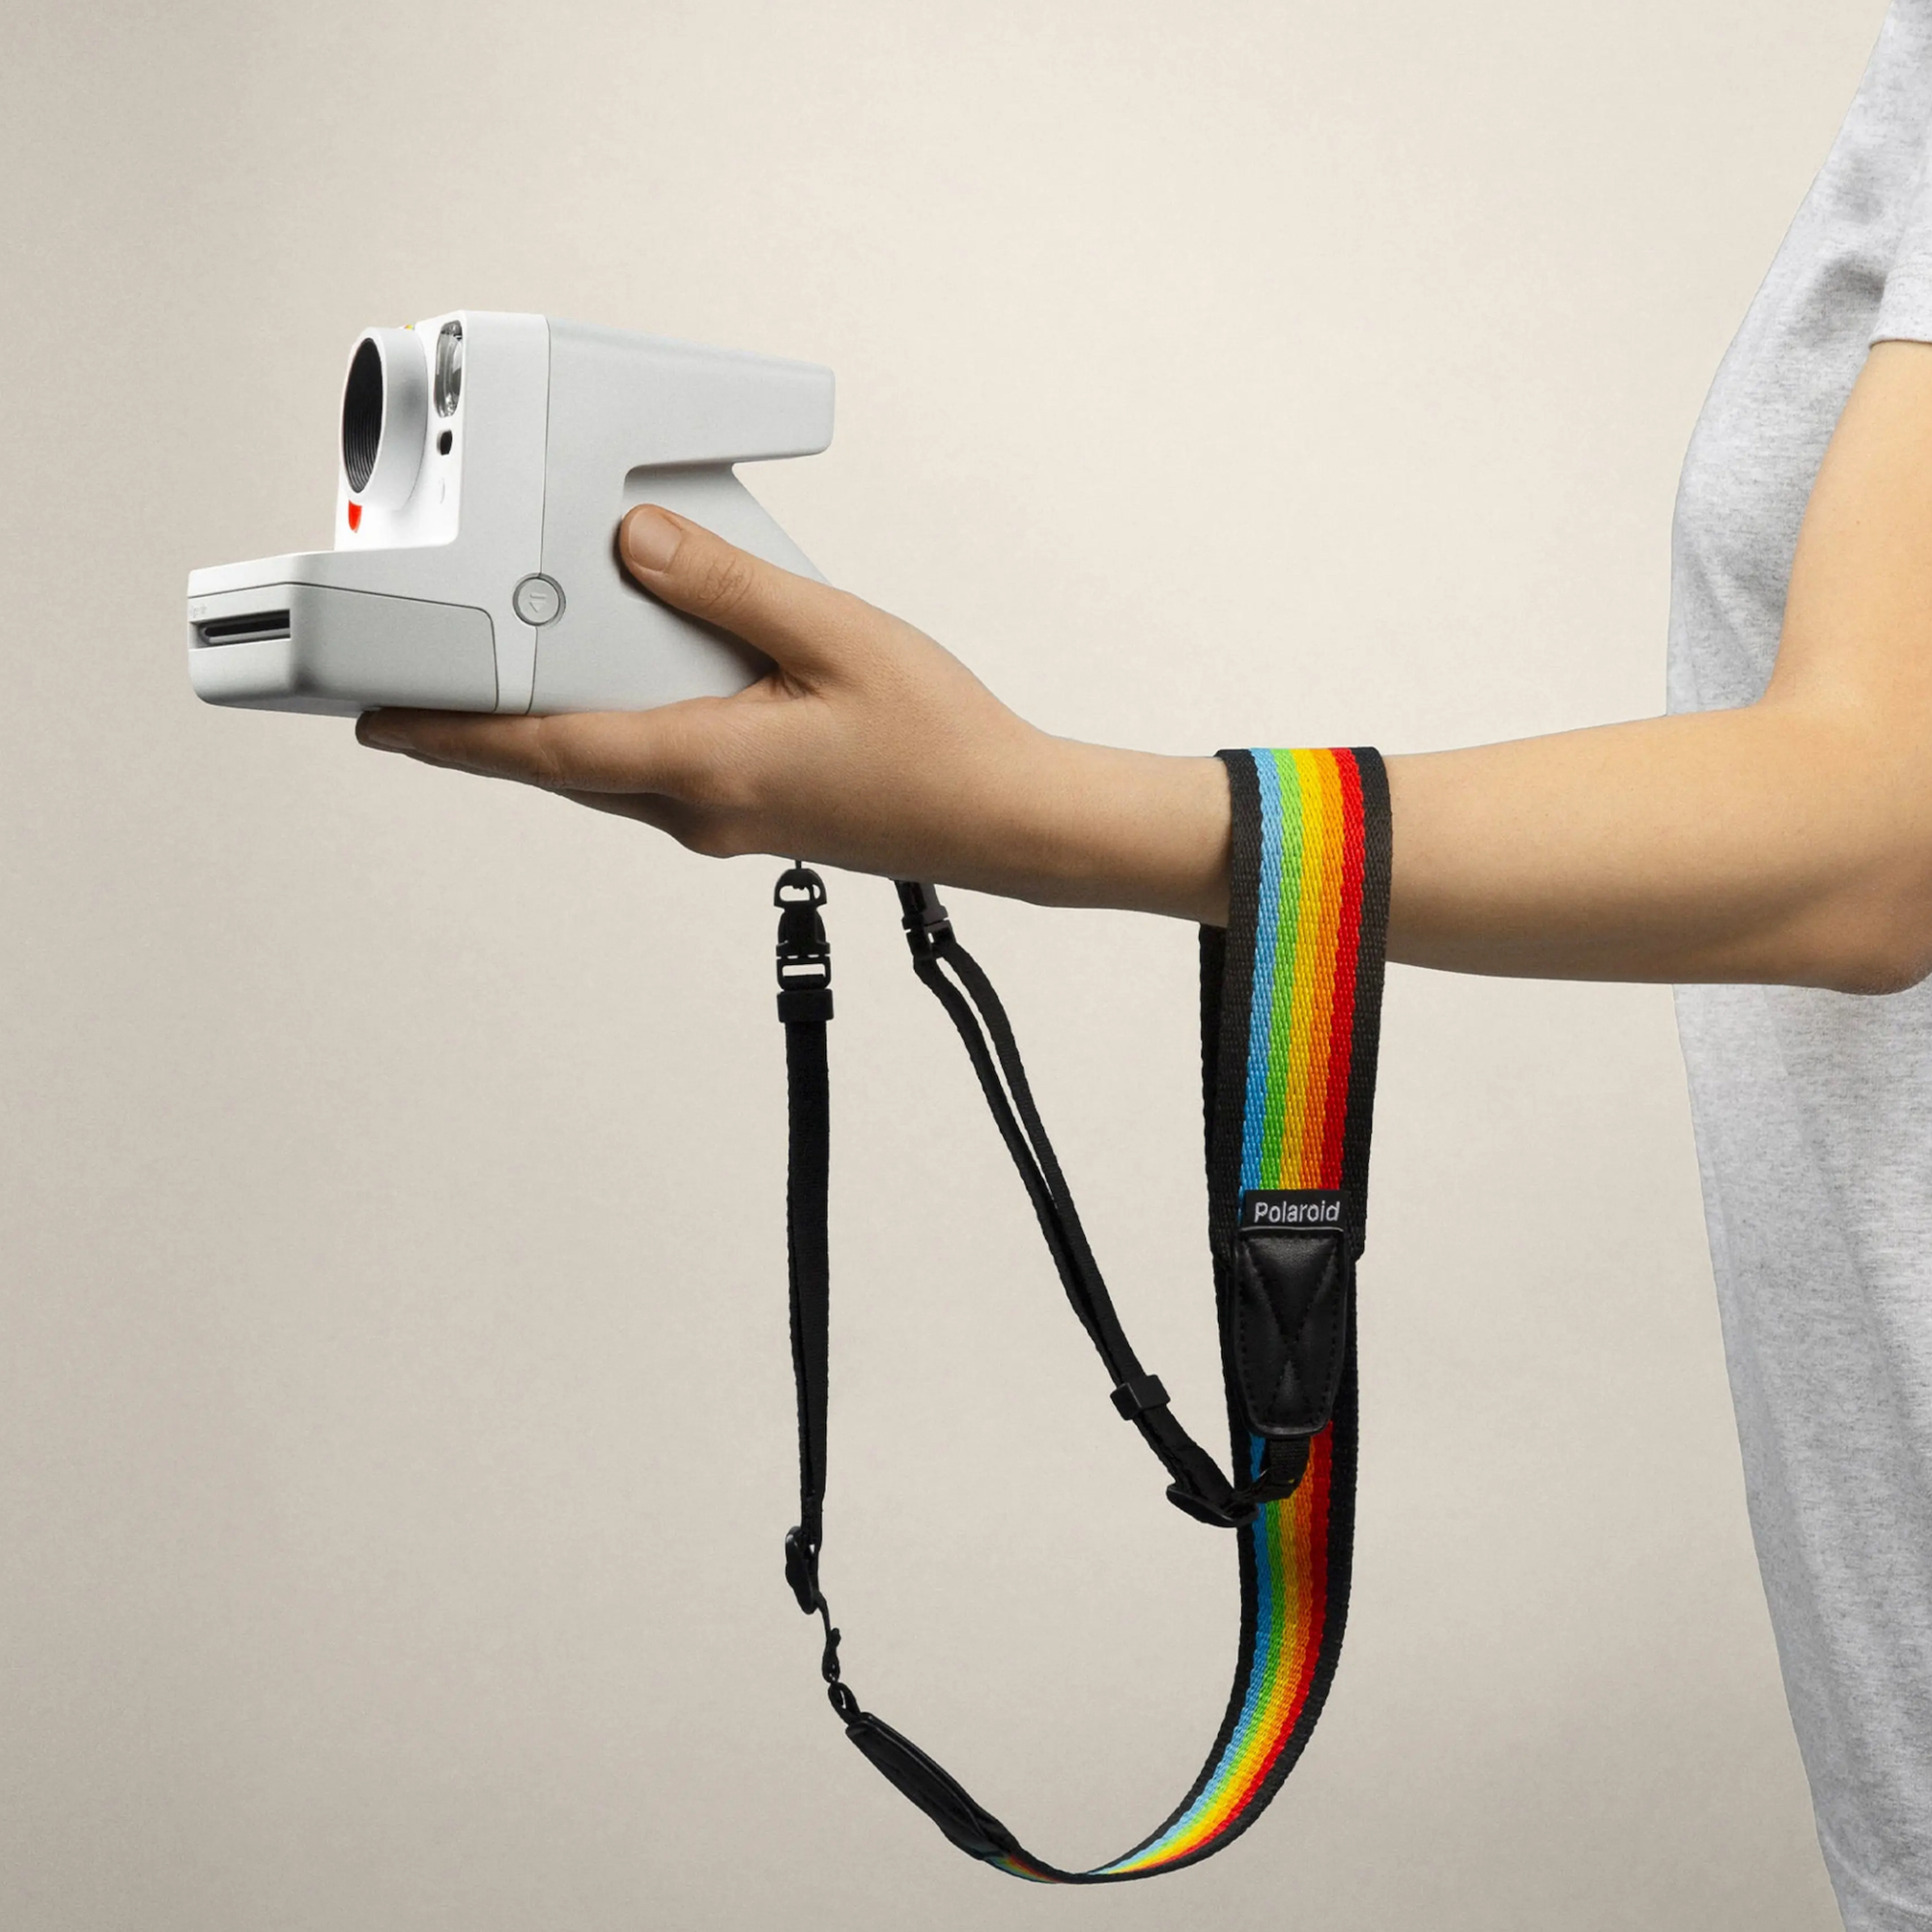 CAMERA STRAP FLAT WHITE/BLACK Camera strap - flat by Polaroid An effortless accessory for Polaroid Now+, Now, OneStep+ and OneStep 2 cameras. Featuring Polaroid branding and a no-snag plastic release, grab this wide and flat camera strap for more hands-off moments.Flat camera strap with plastic release. Color: Rainbow Black / Rainbow White Fits Polaroid Now+, Now, OneStep 2 and OneStep+ cameras. Adjustable, one size fits all. Length: 43 in (110cm) Width: 1.4 in (3.5 cm)